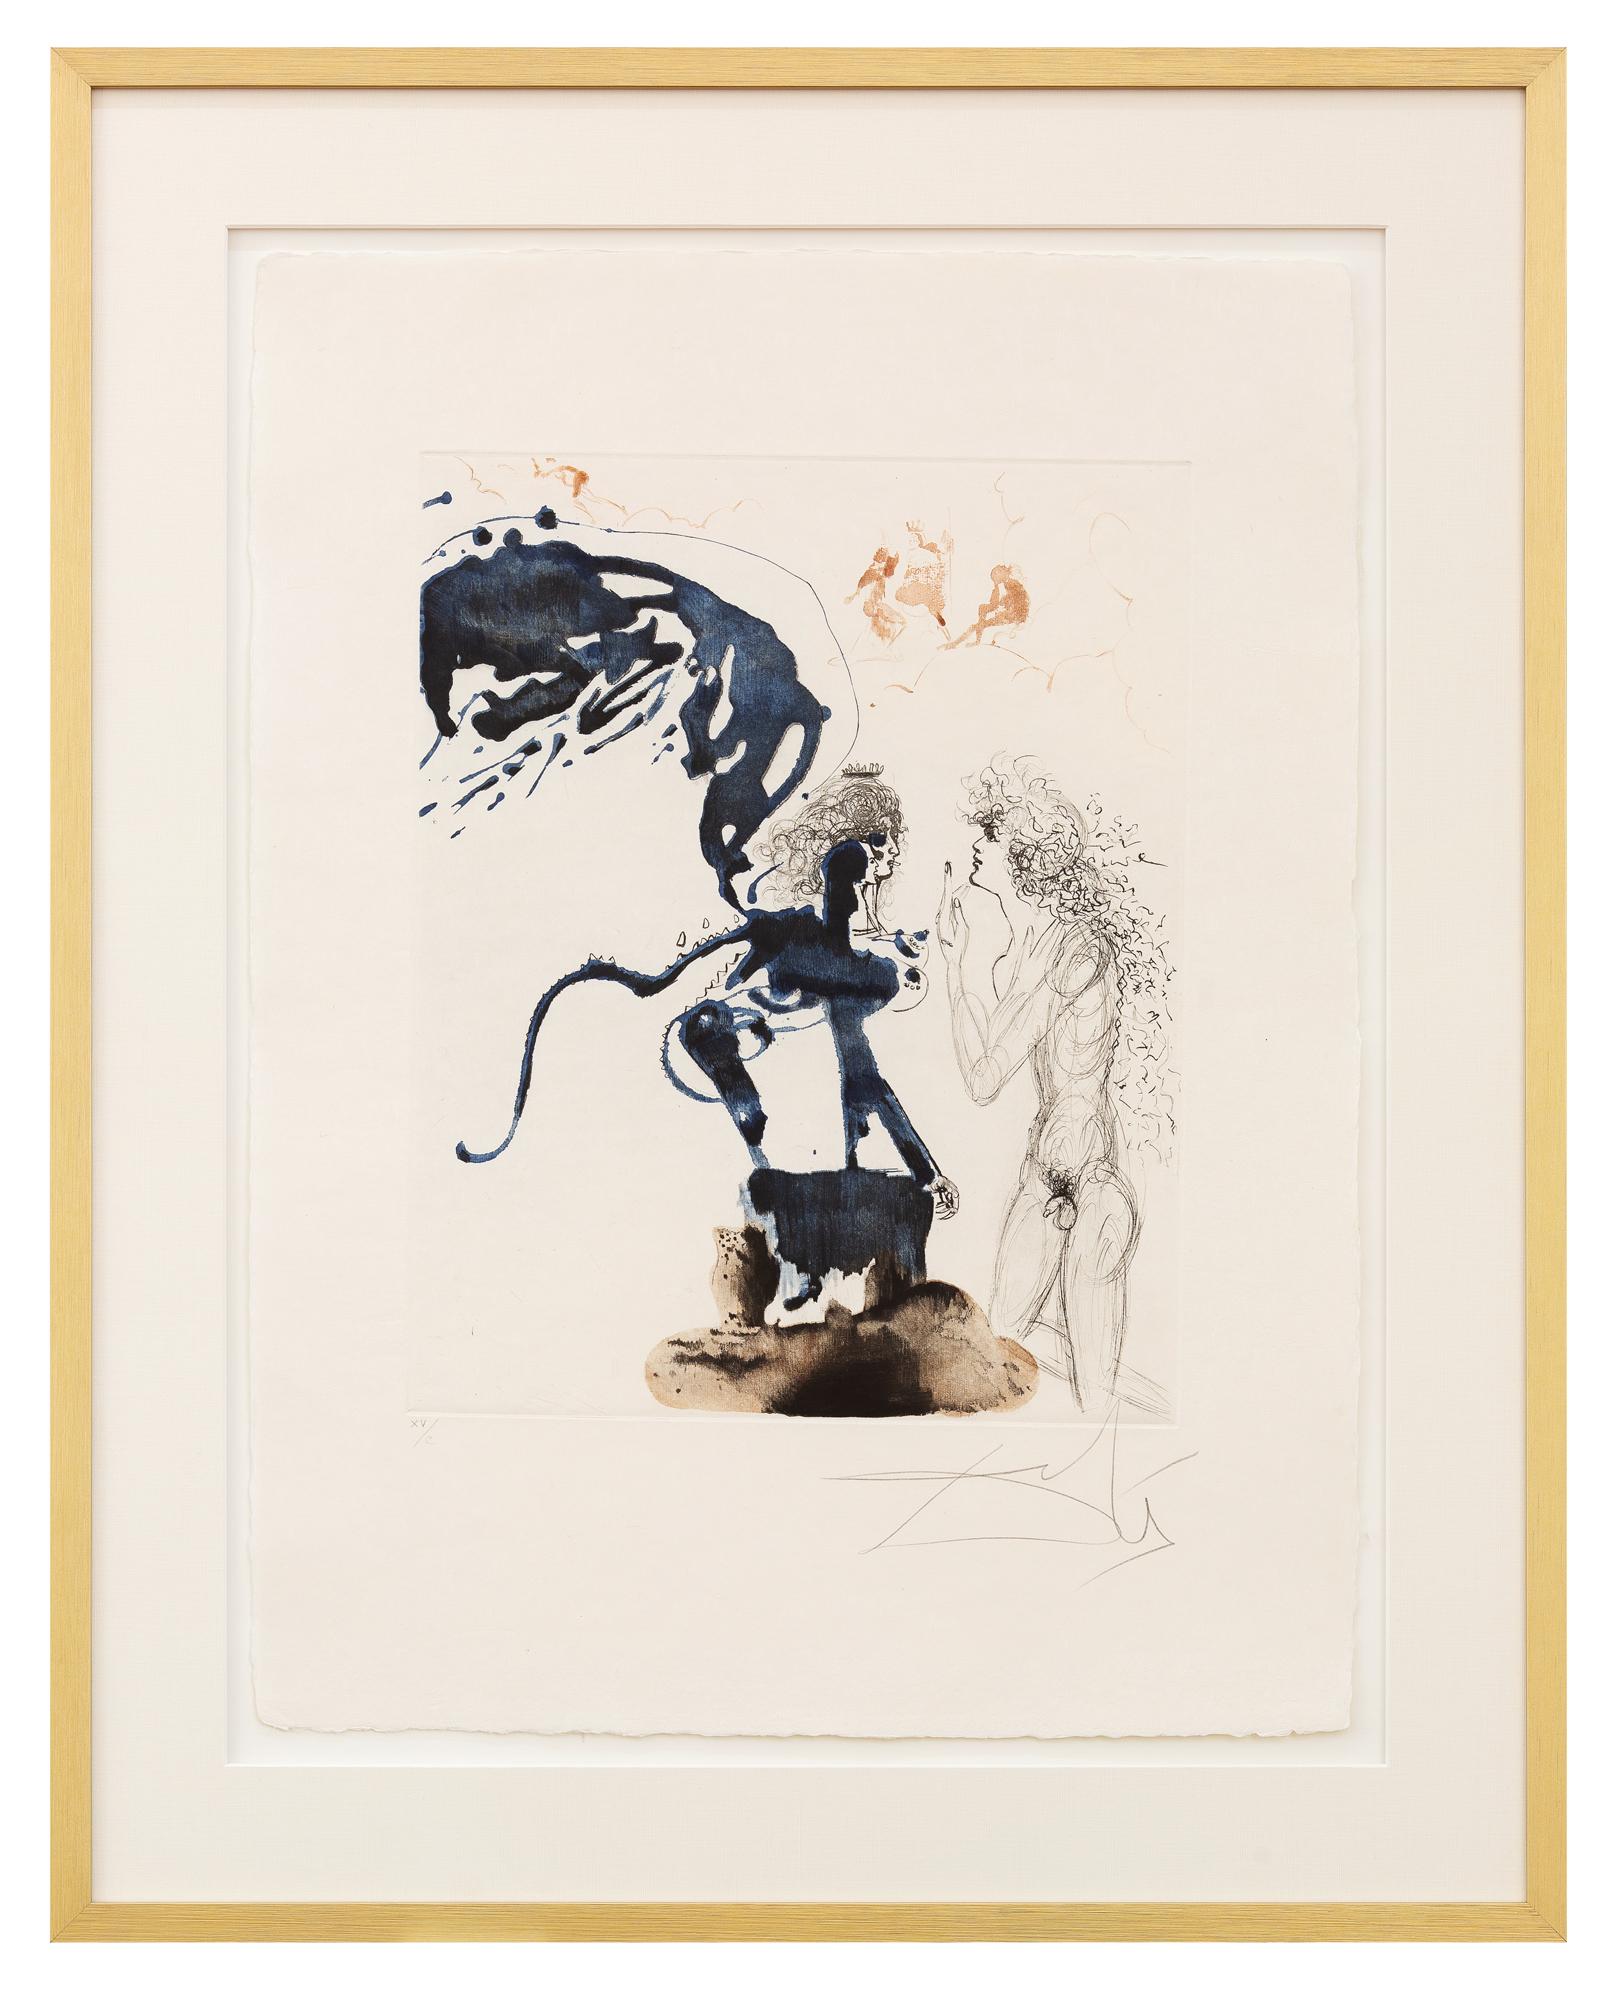 Mythology "Oedipus and Sphinx" - Print by Salvador Dalí